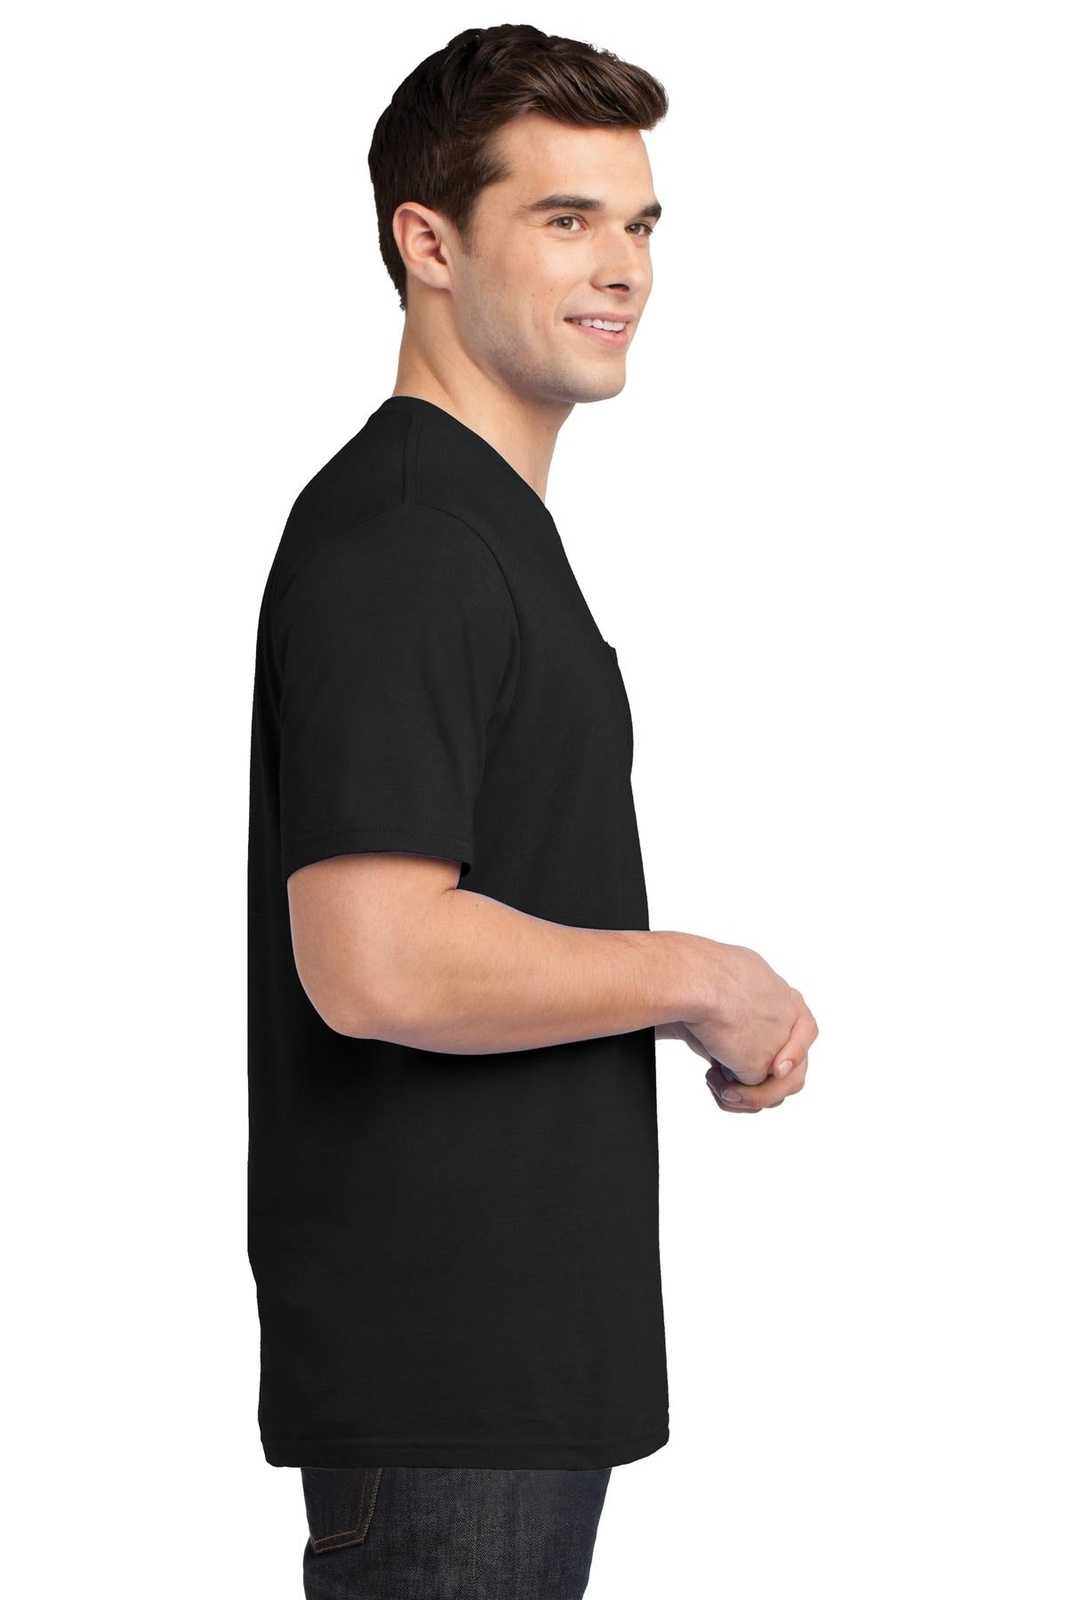 District DT6000P Very Important Tee with Pocket - Black - HIT a Double - 3